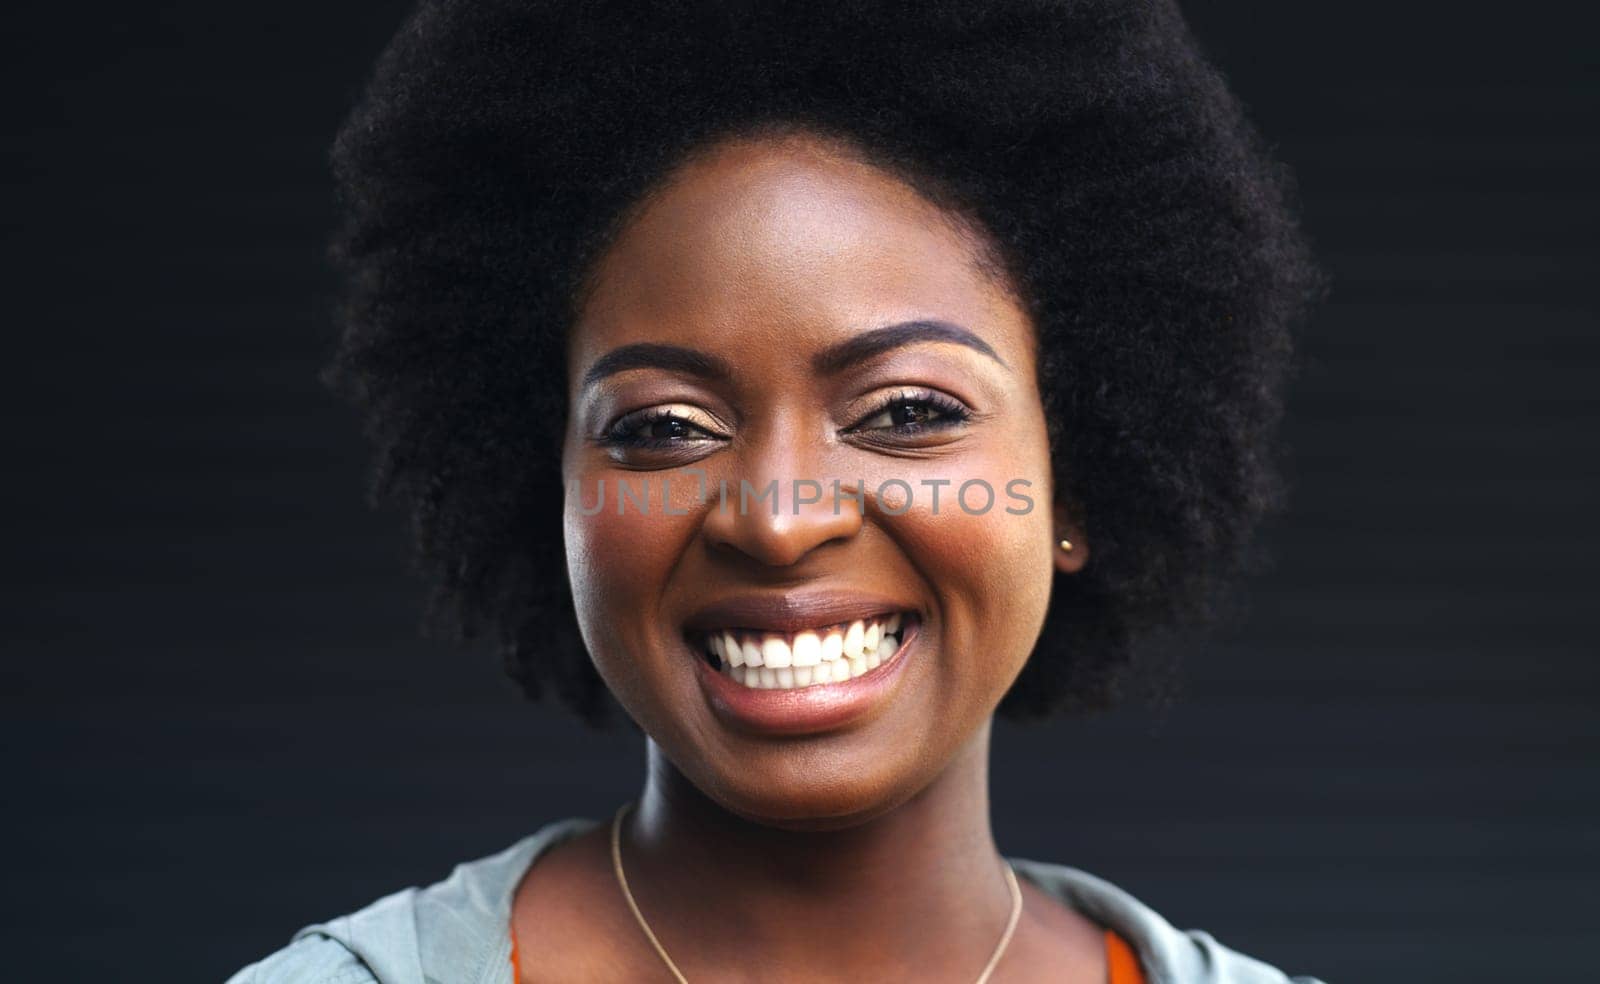 Your smile can change the world. a happy young woman posing against a dark background